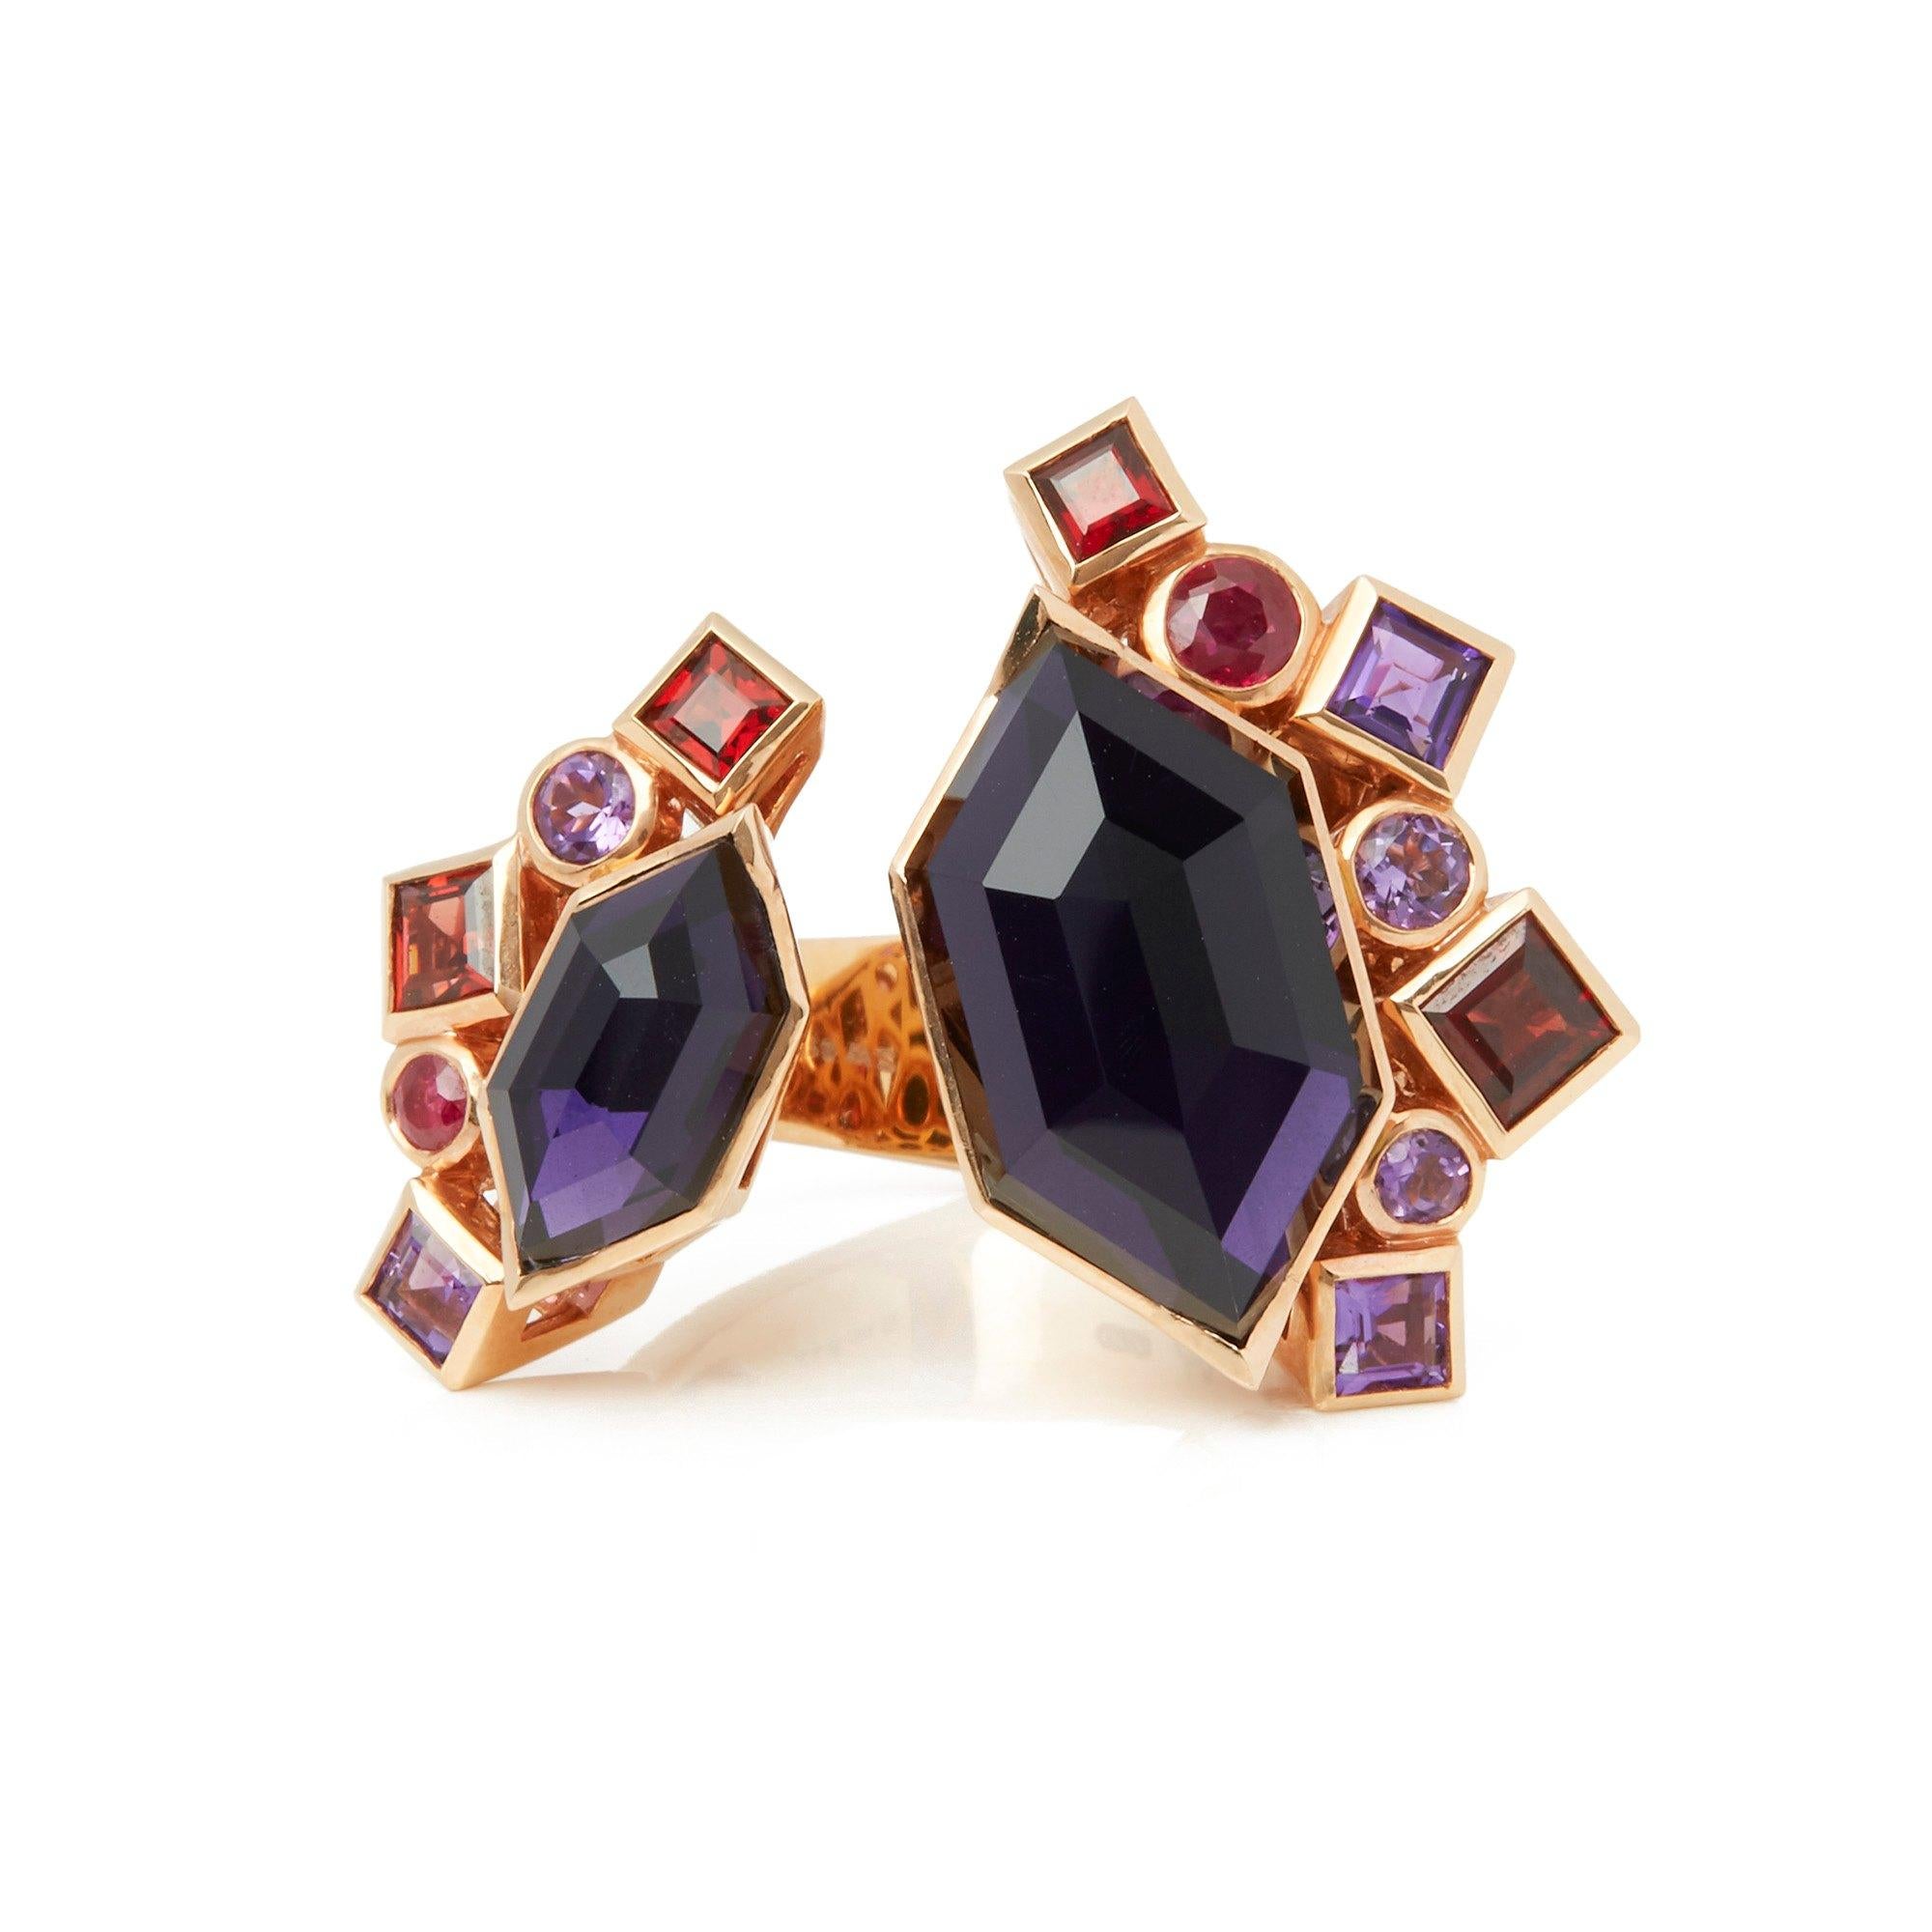 This Ring by Stephen Webster is from his Crystal Haze Gold Struck Collection and features Two Synthetic Amethyst set sections Totalling 9.65cts Surrounded with mixed cut Amethyst, Red Garnets and Rubies. Set in 18k Yellow Gold with Signature Stephen